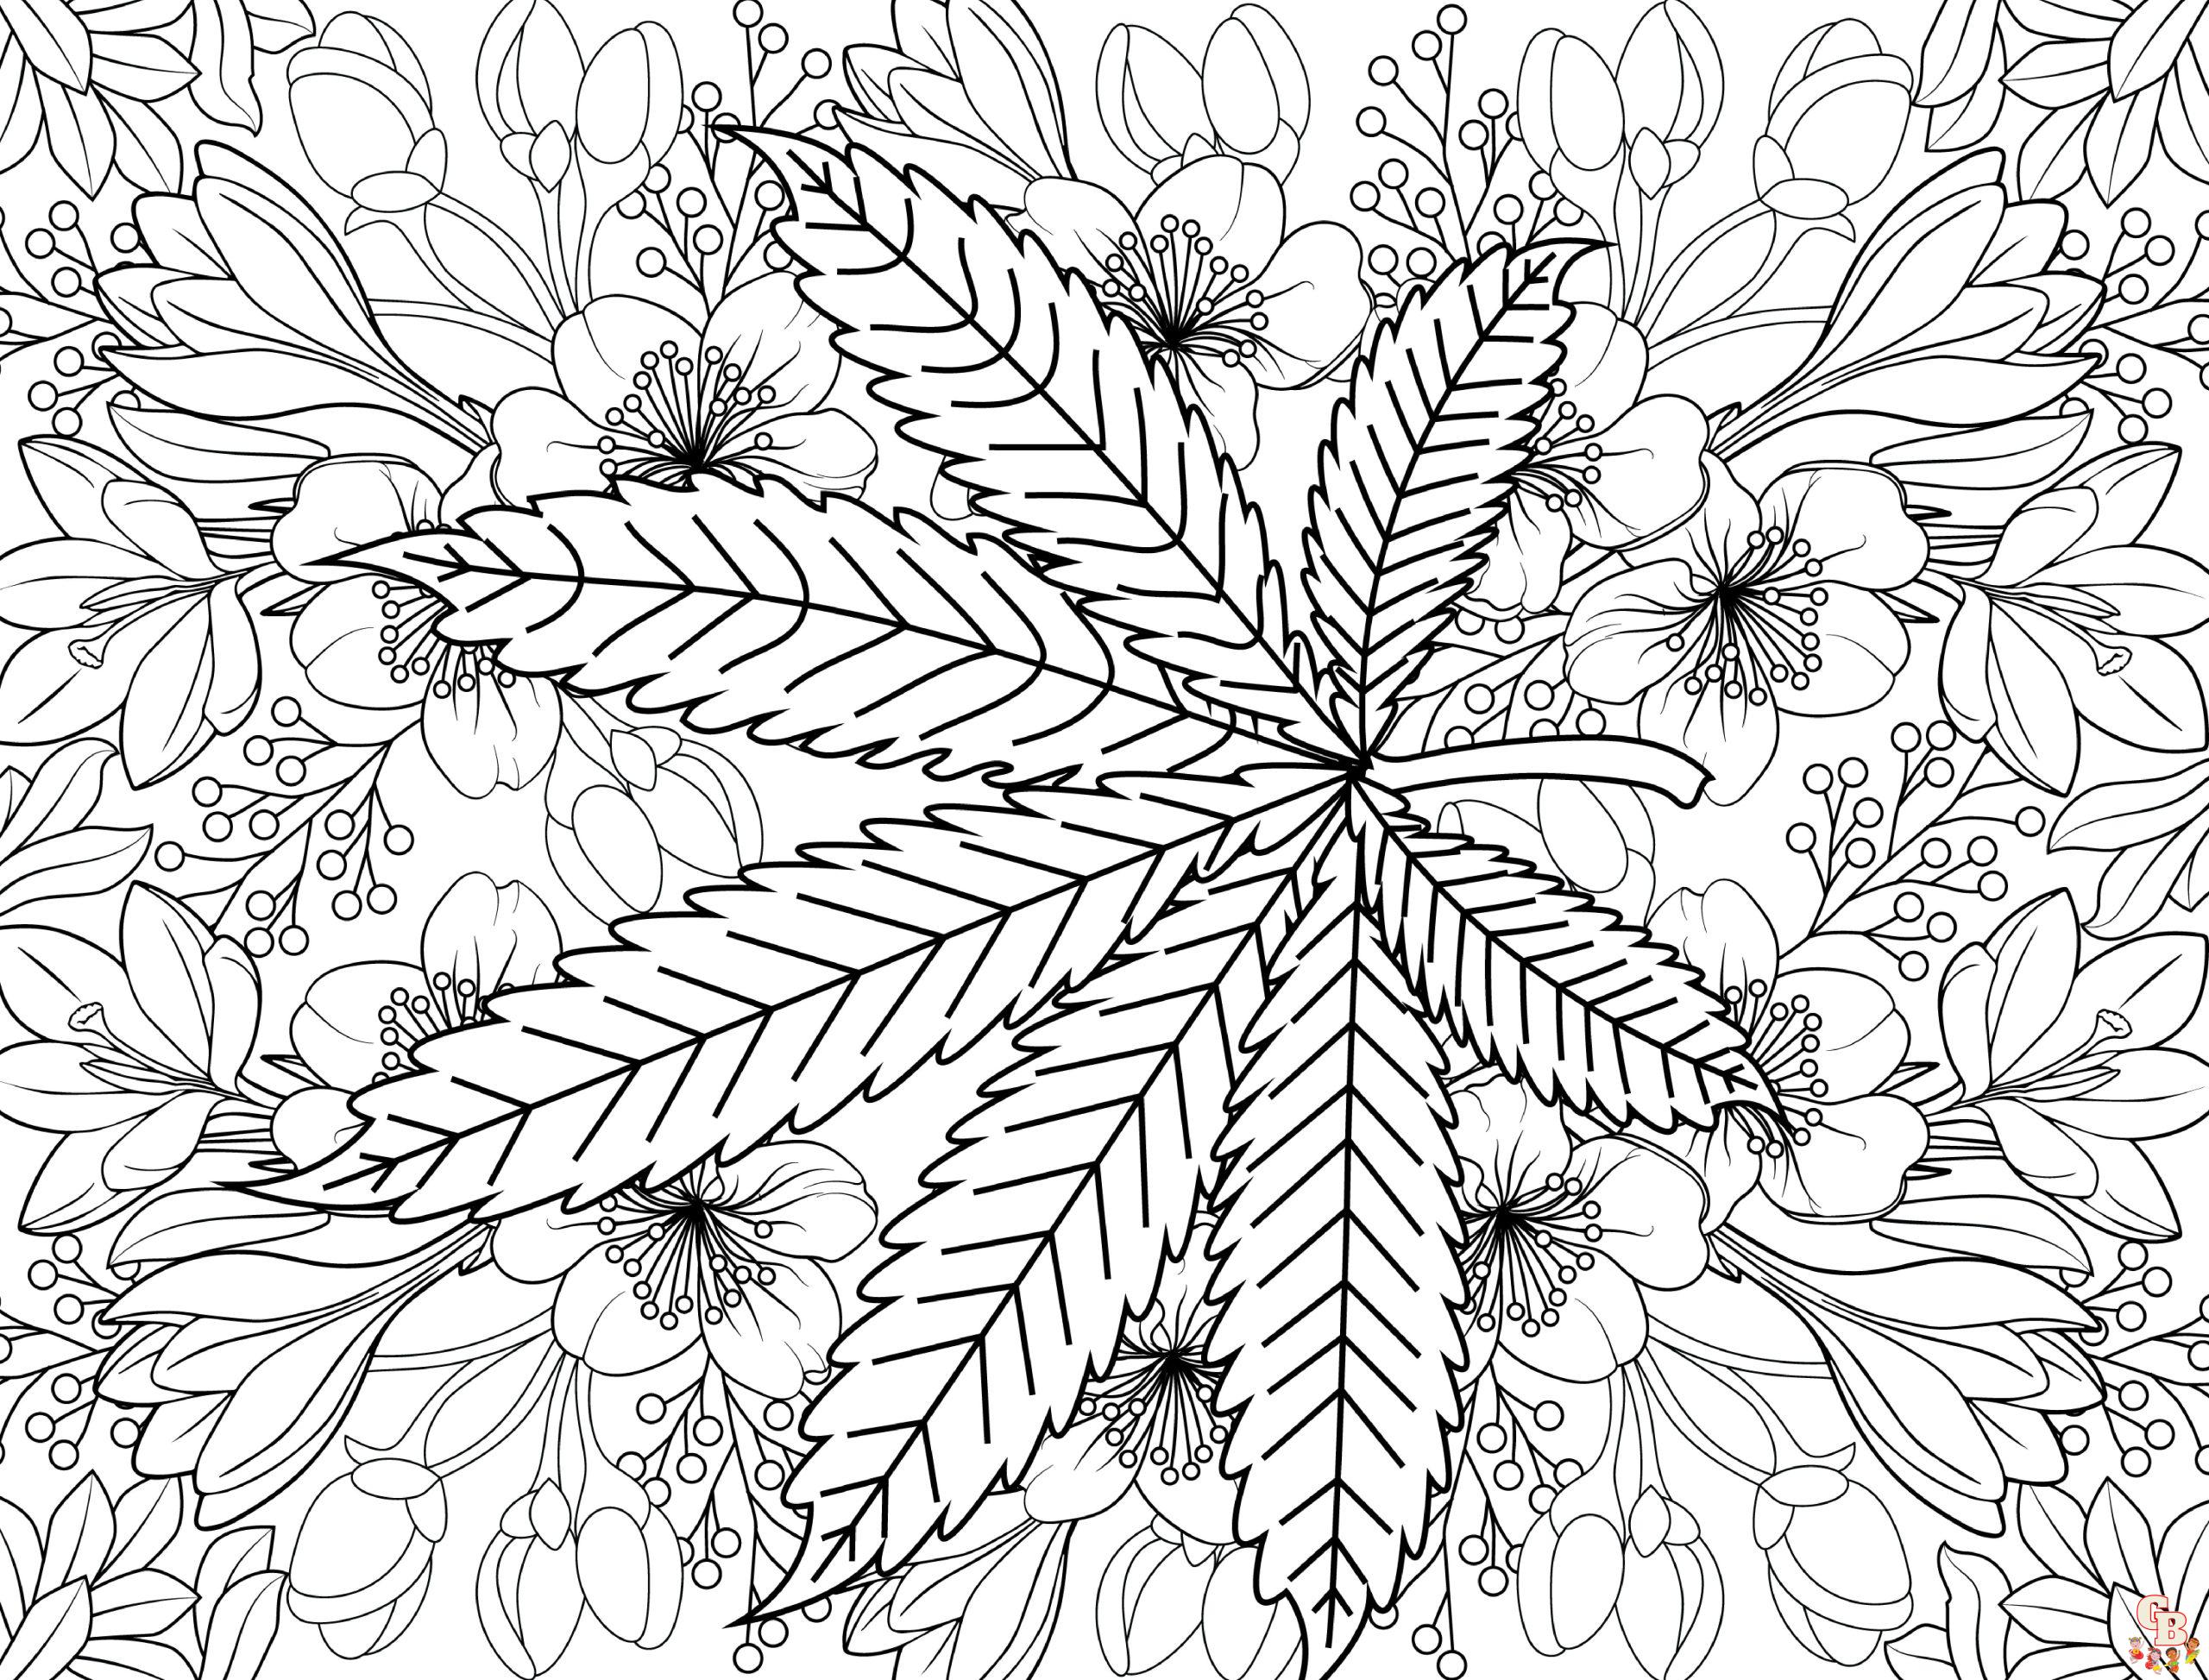 Printable marijuana coloring pages free for kids and adults